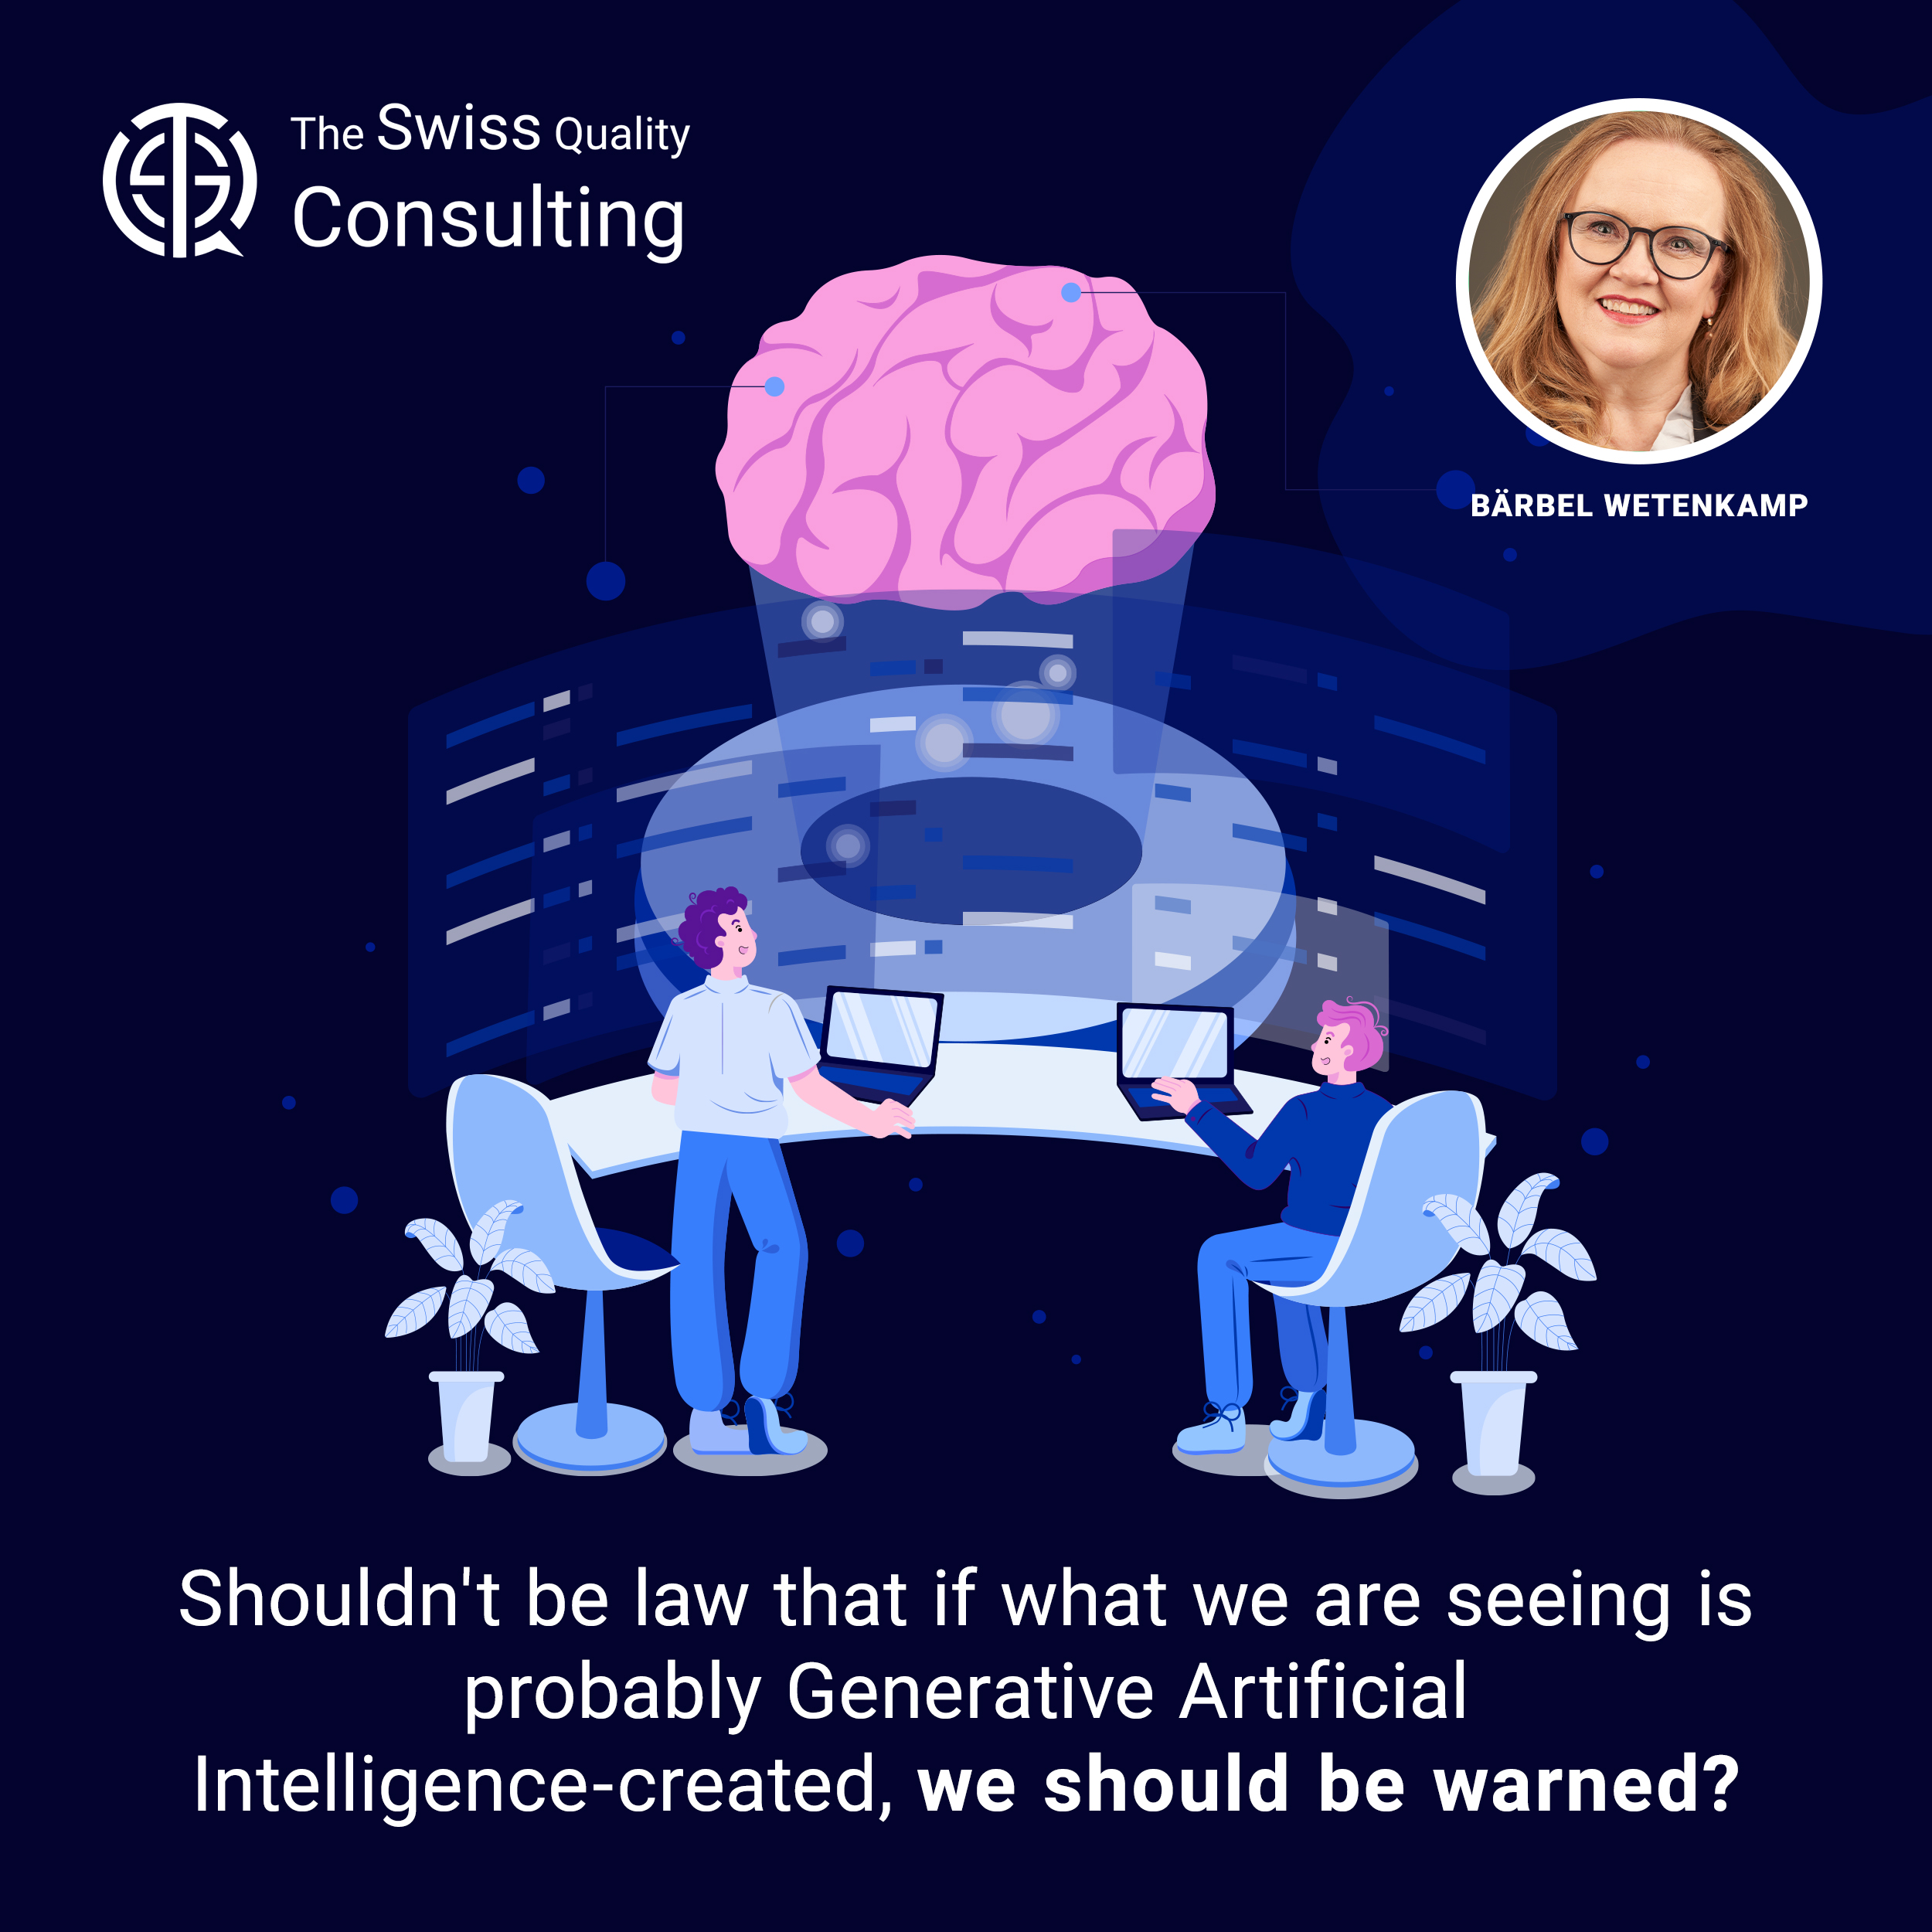 Shouldn't be law that if what we are seeing is probably Generative Artificial Intelligence-created, we should be warned?